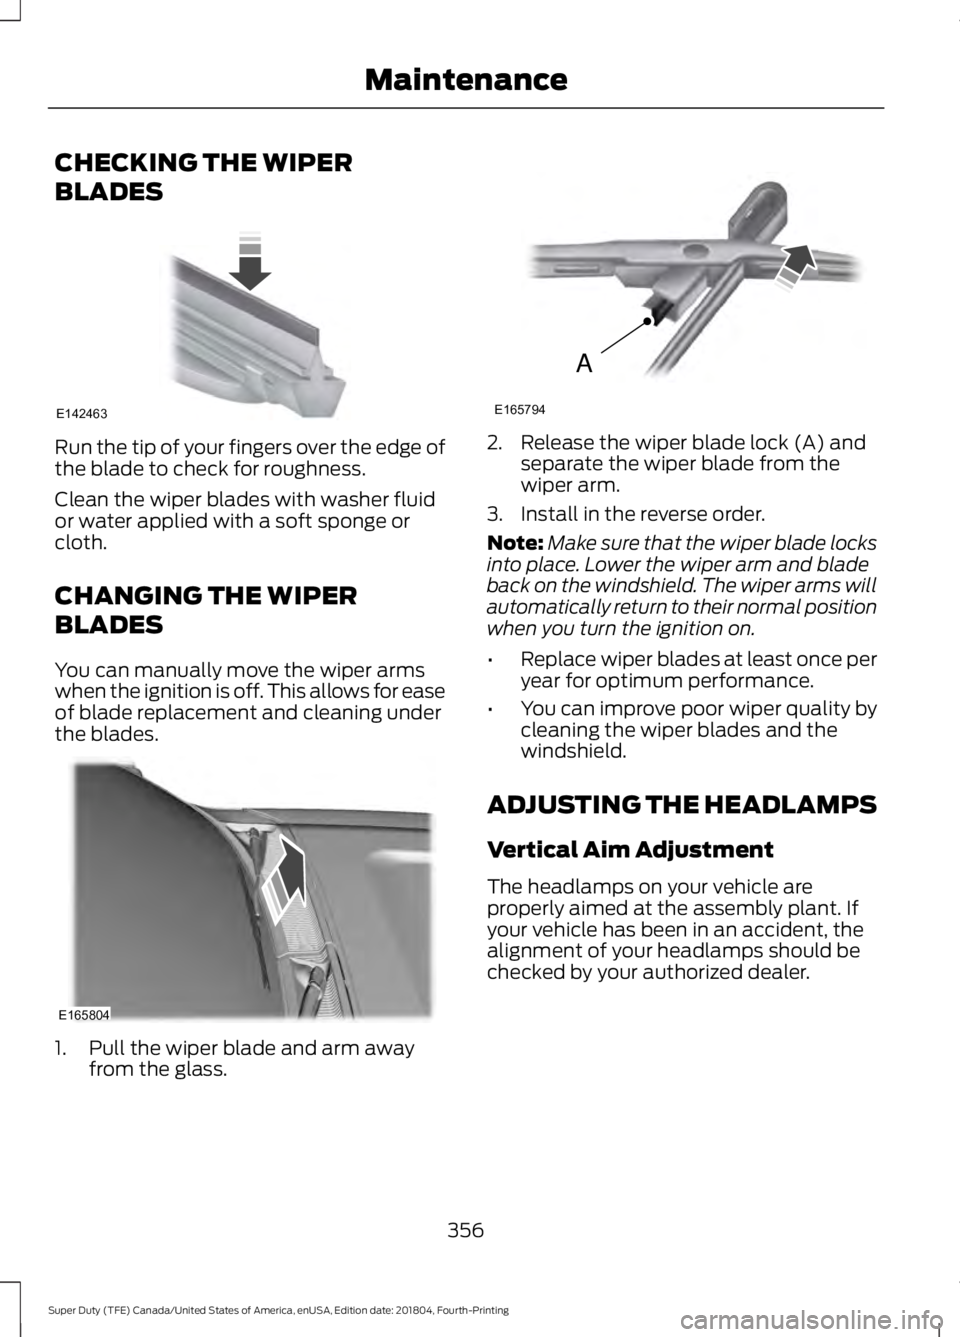 FORD F-350 2019  Owners Manual CHECKING THE WIPER
BLADES
Run the tip of your fingers over the edge of
the blade to check for roughness.
Clean the wiper blades with washer fluid
or water applied with a soft sponge or
cloth.
CHANGING